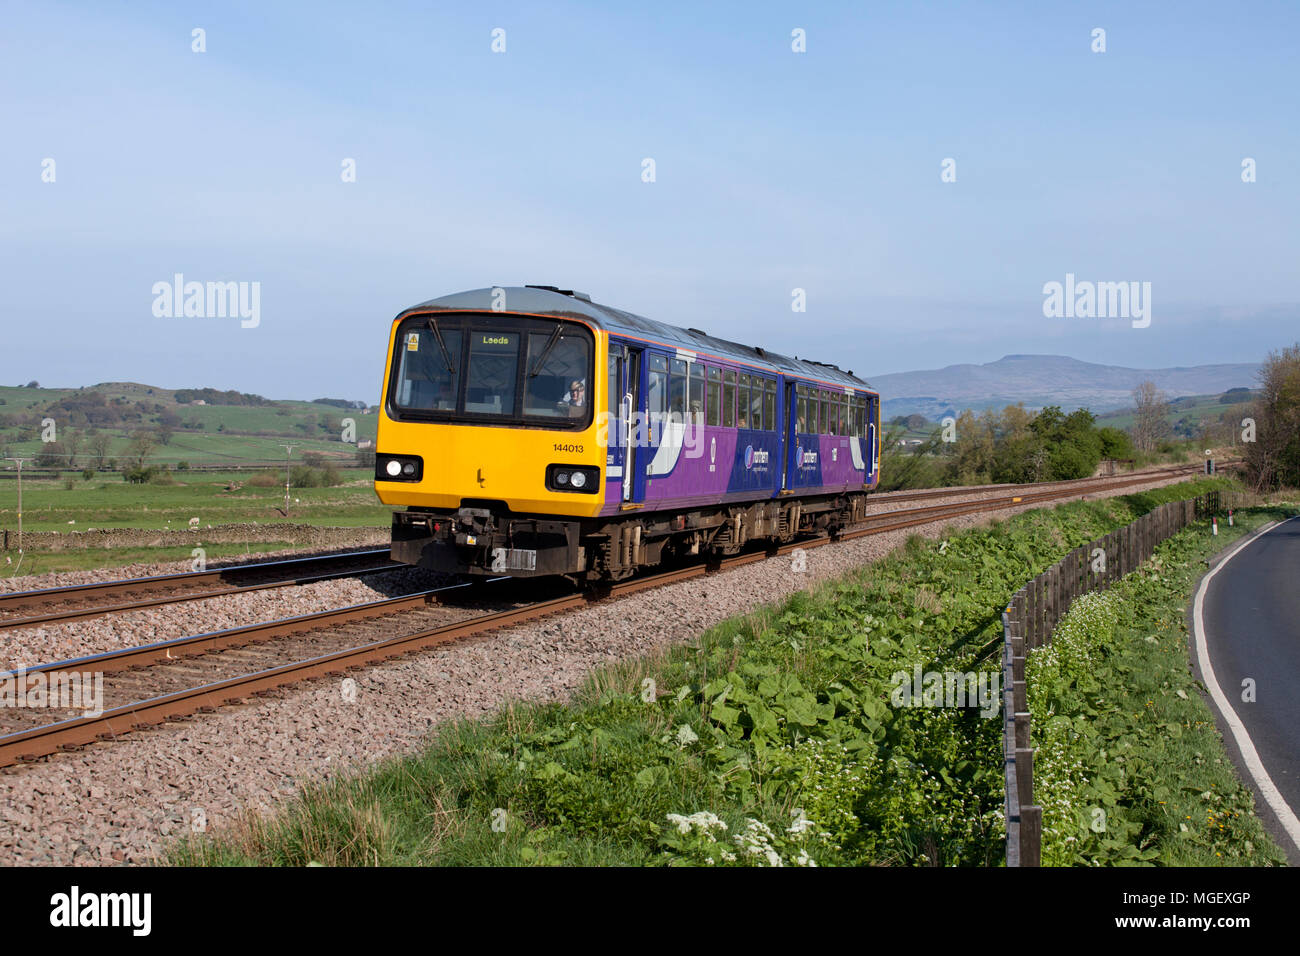 A Northern rail class 144 pacer train at  Settle Junction, Yorkshire with a   Lancaster to  Leeds train Stock Photo